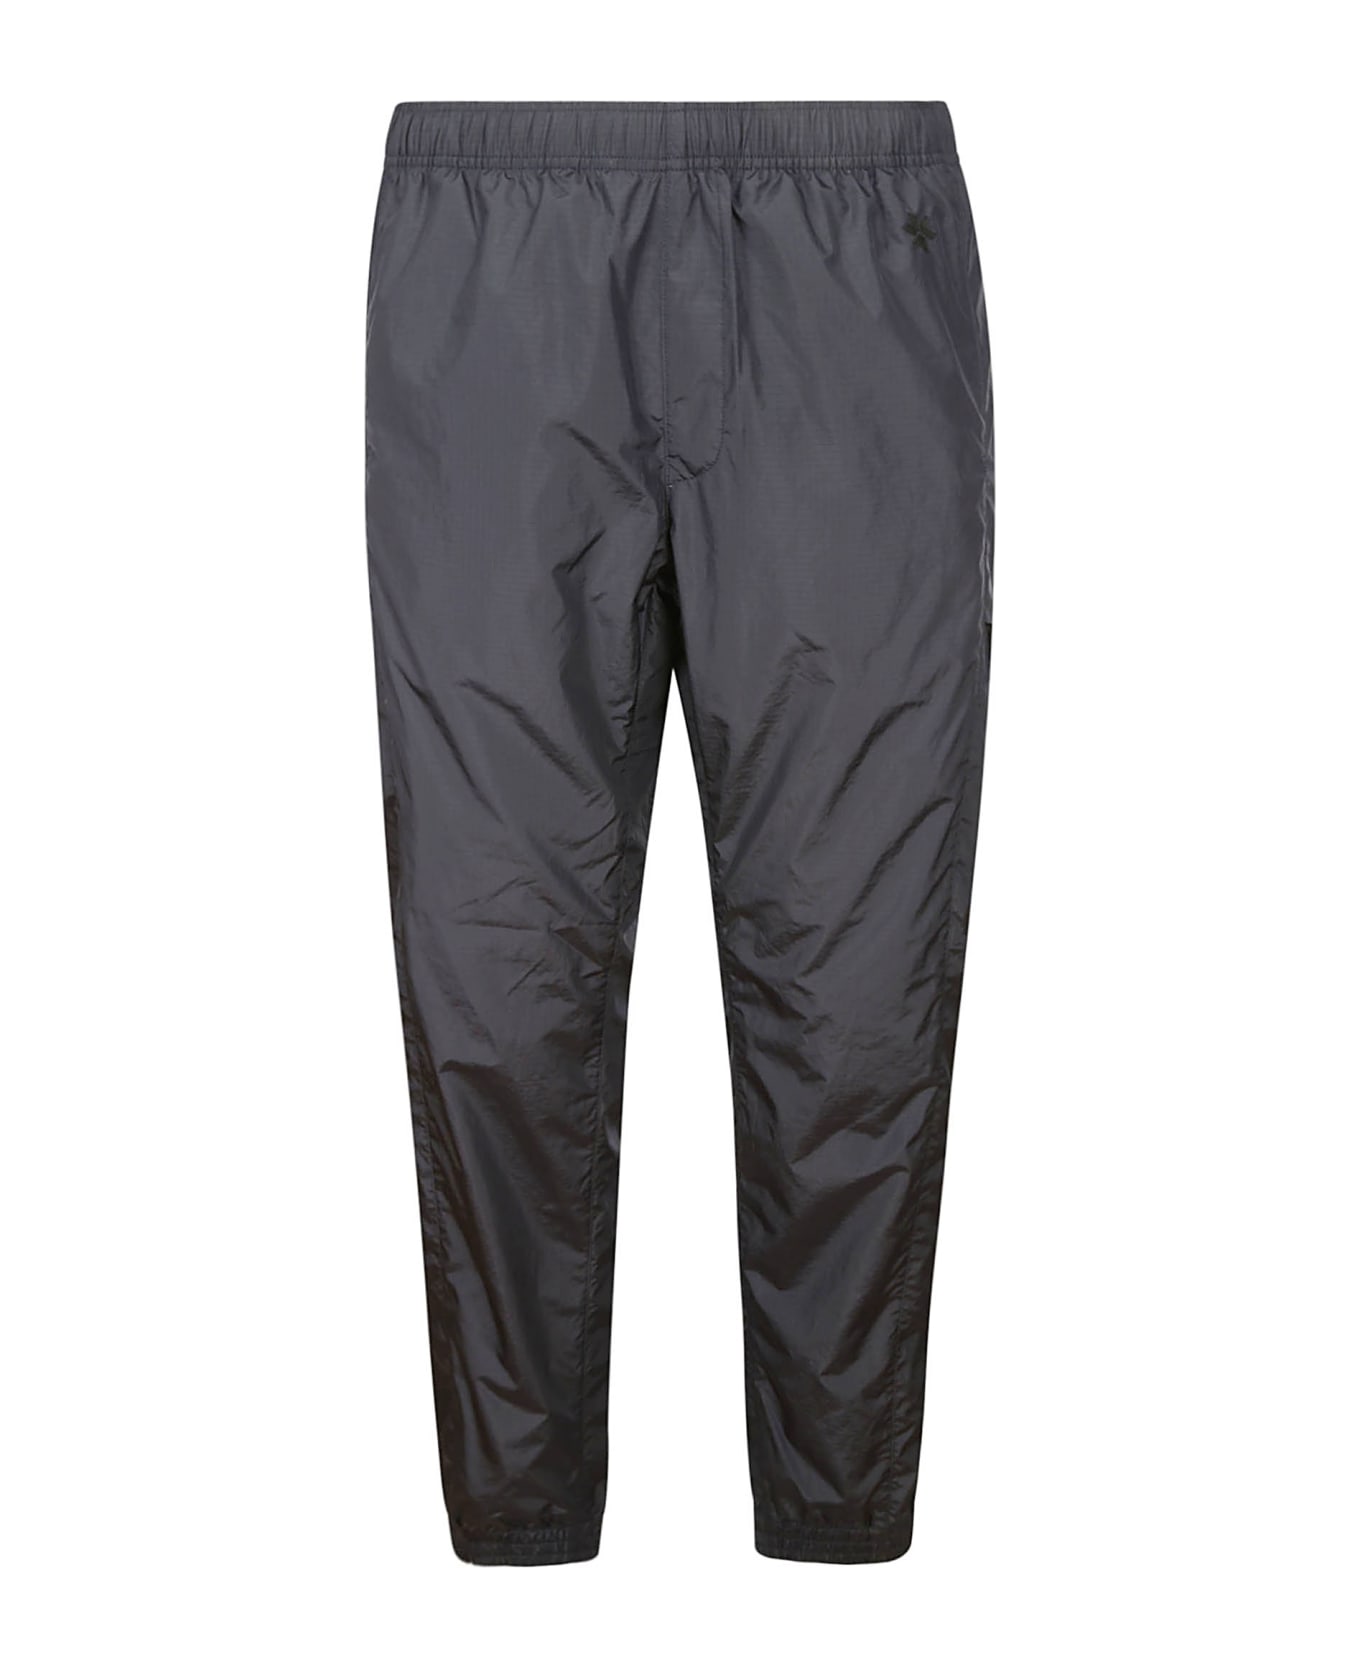 Goldwin Ripstop Light Hike Pants - In Ink Navy ボトムス